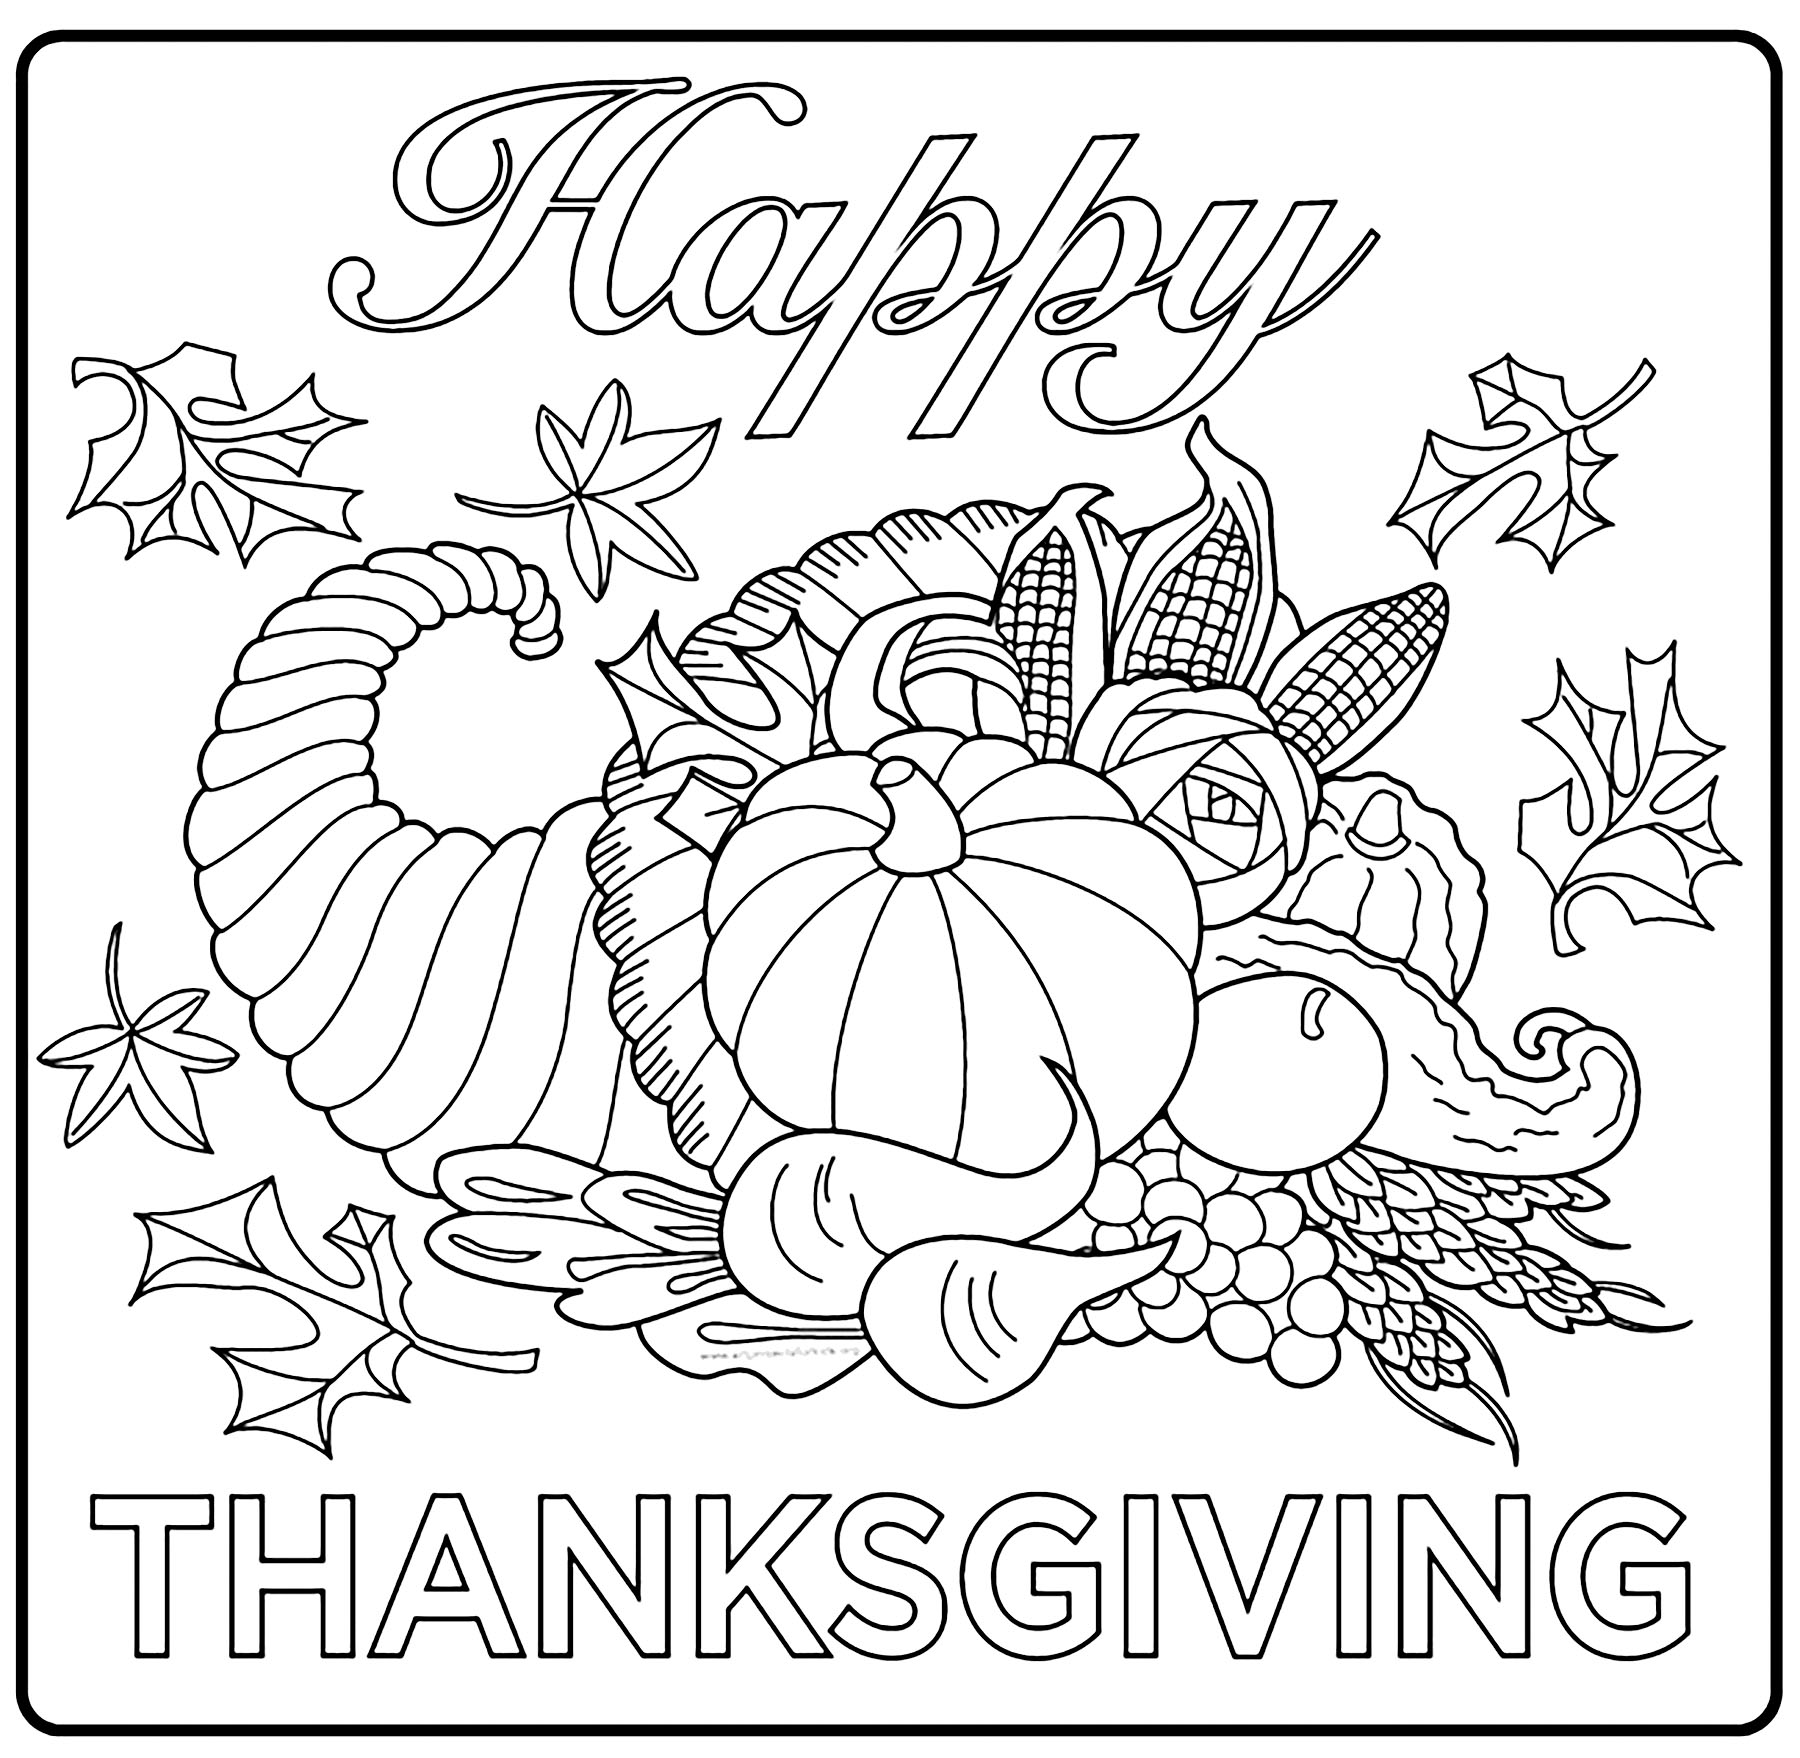 Thanksgiving free to color for children Thanksgiving Kids Coloring Pages